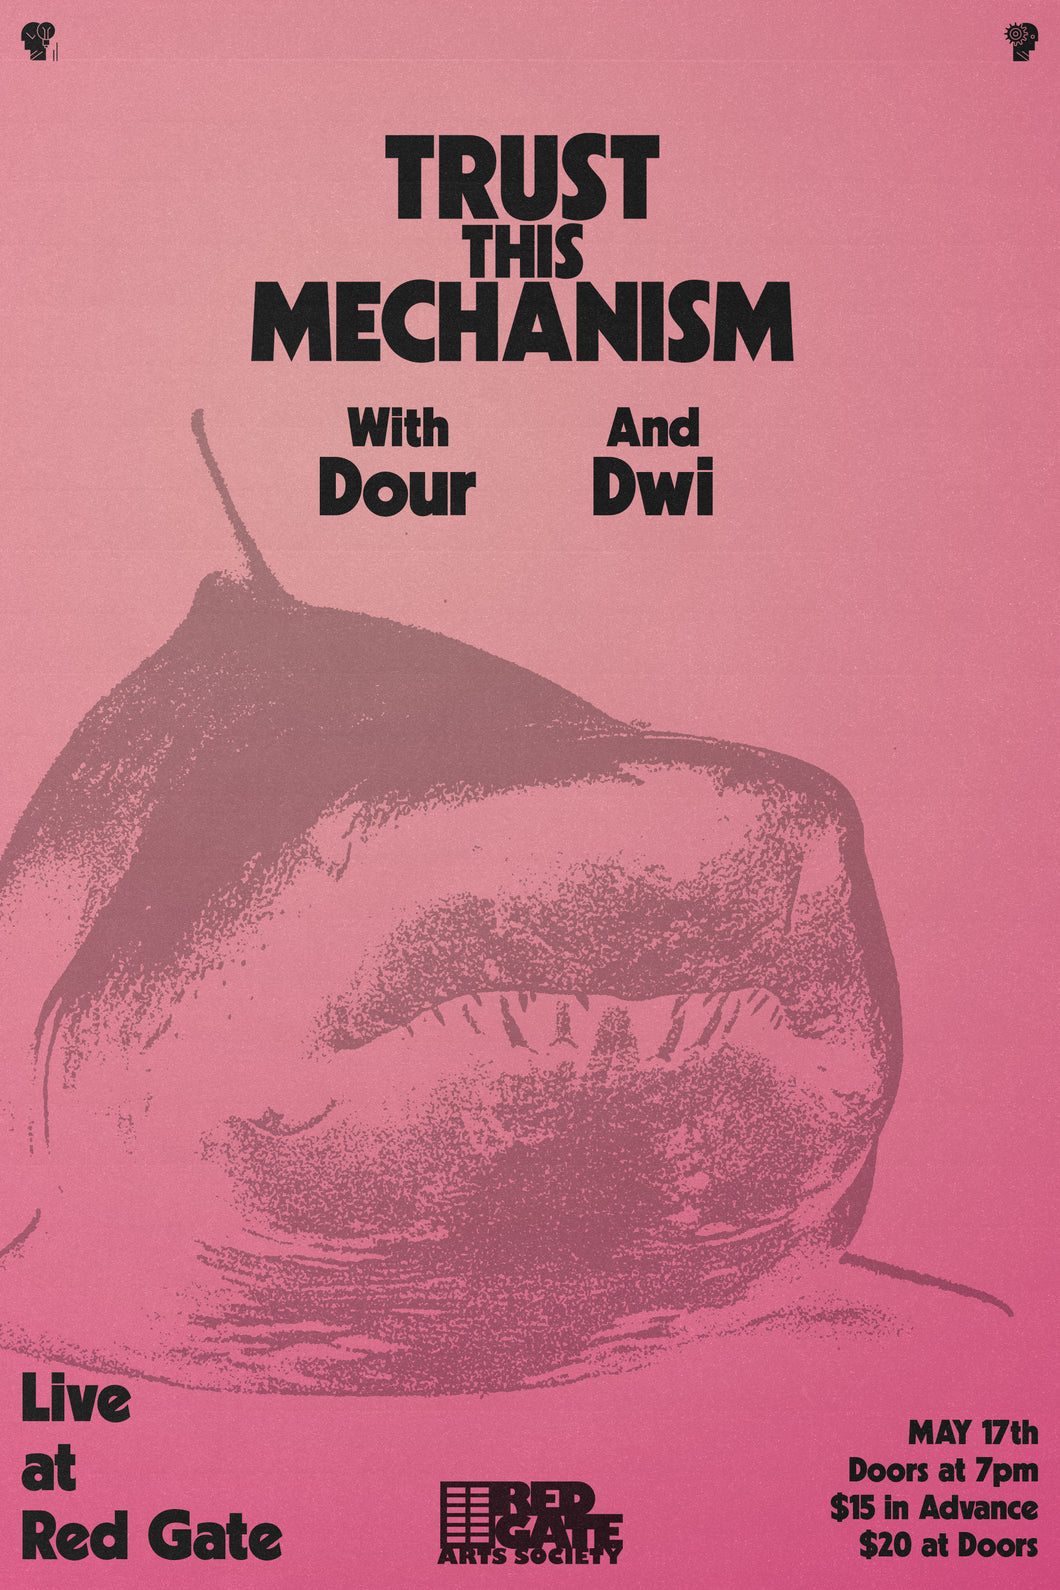 May 17th at Red Gate - Trust This Mechanism, DOUR, Dwi